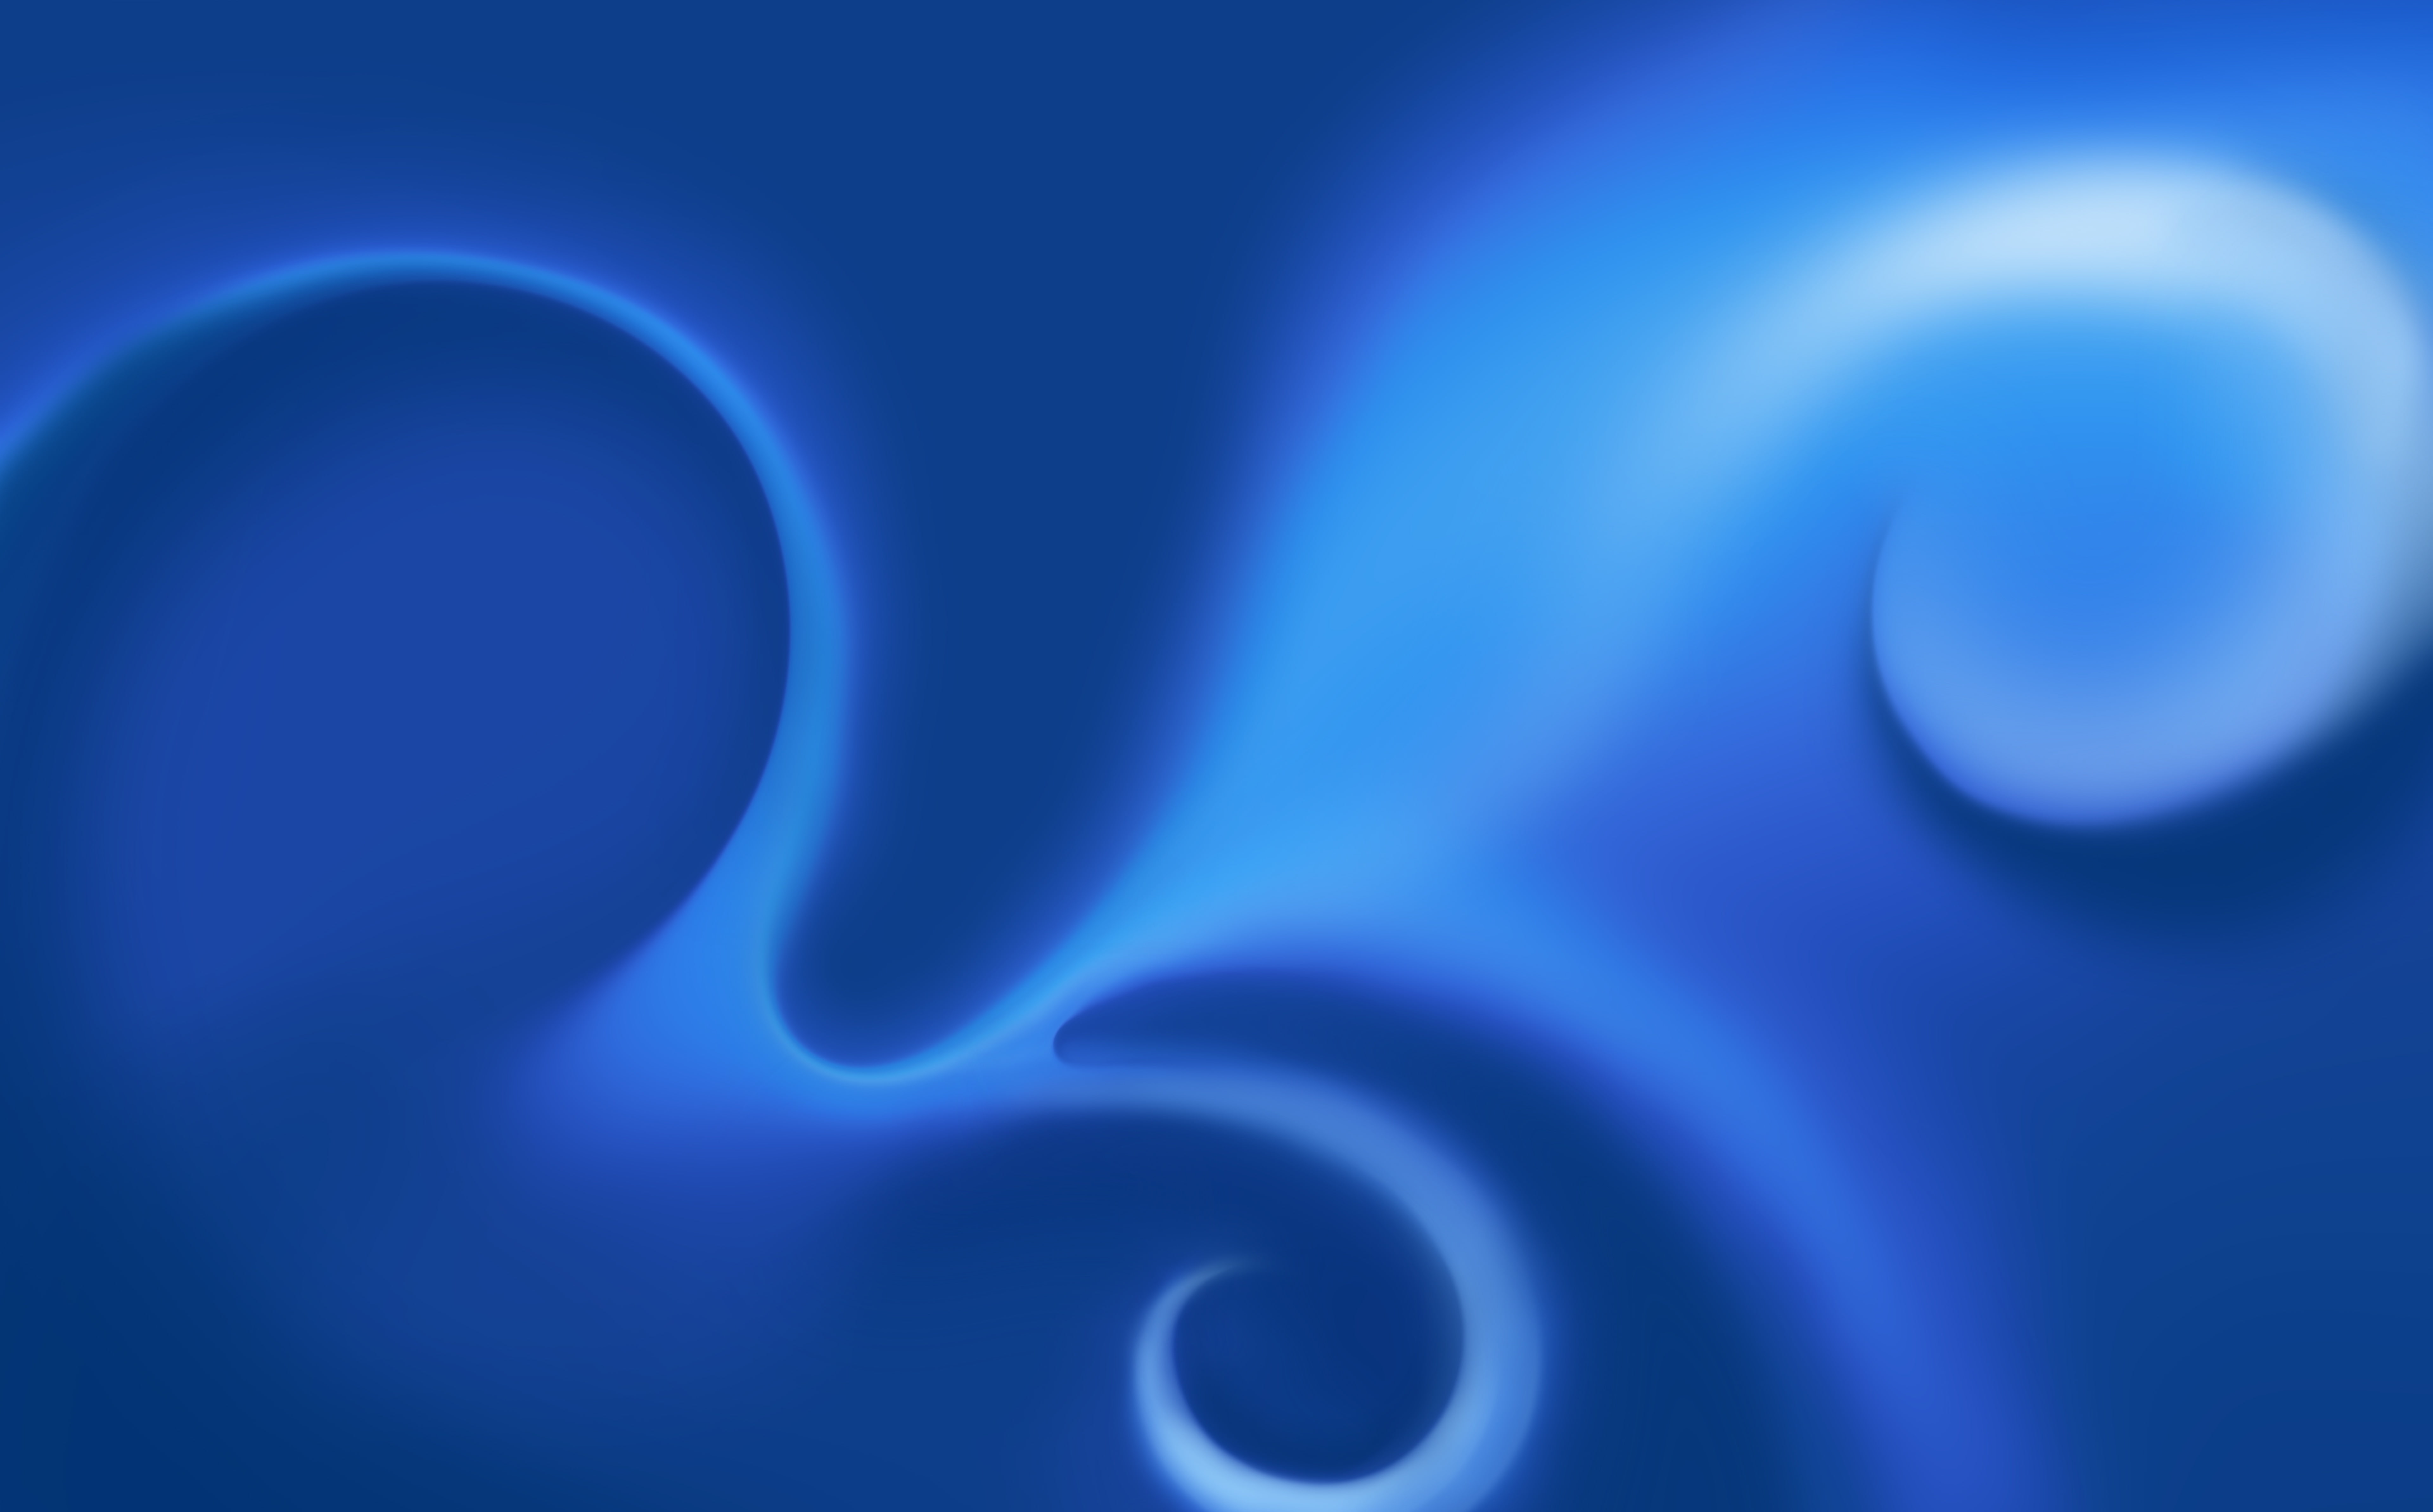 Simple Swirls Design Blue Background, Artistic, Abstract, no people